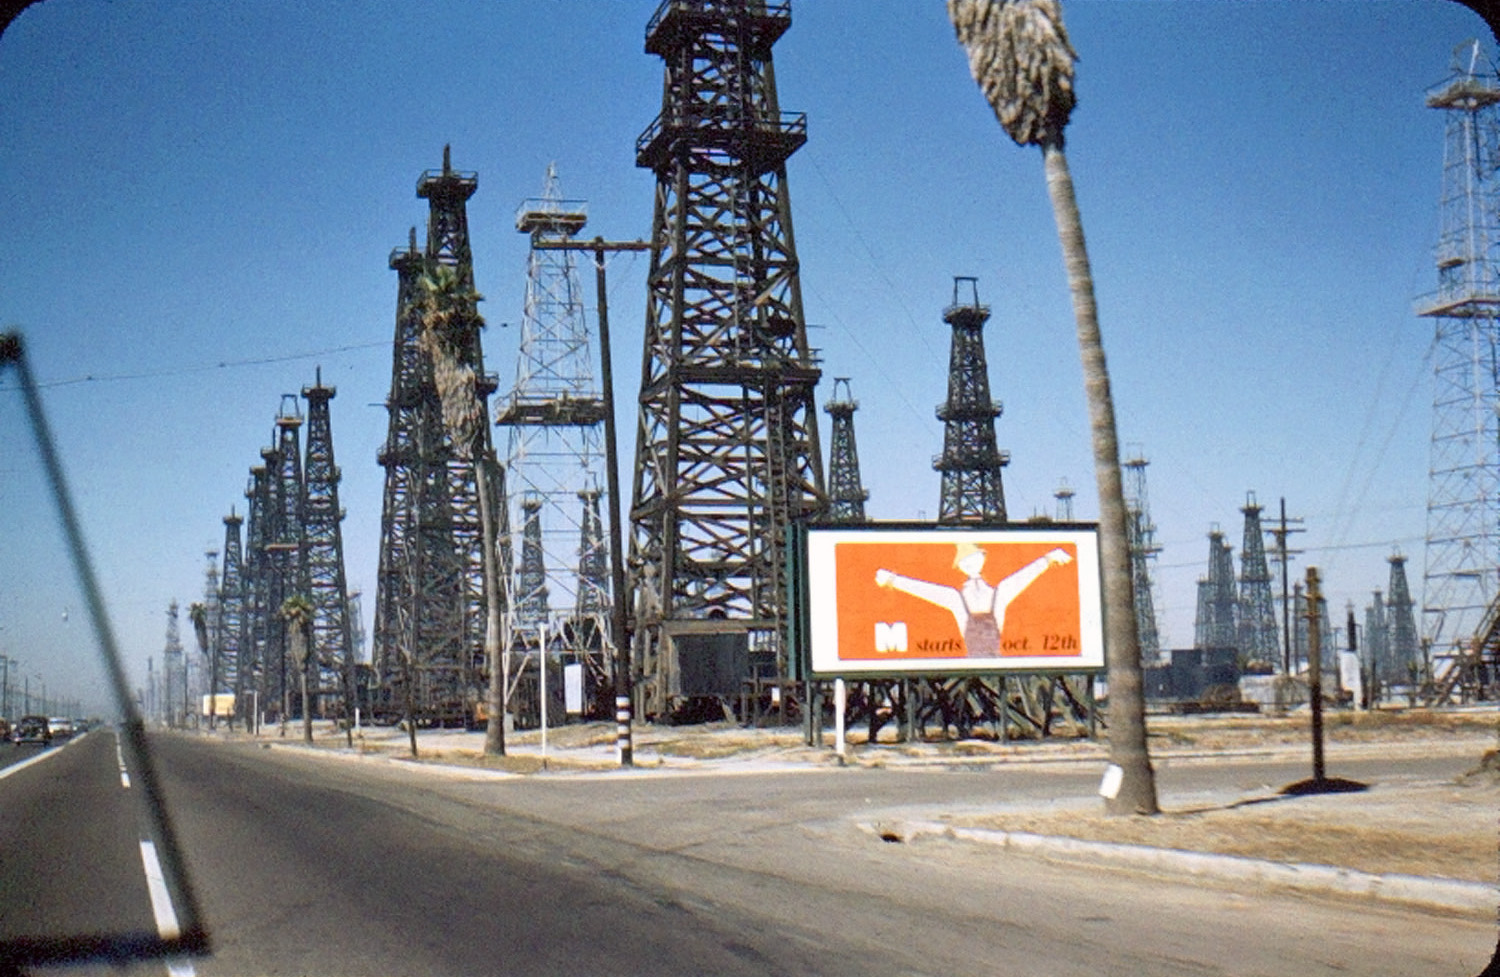 I see palm trees and the slide was found here in California so I'm guessing this is in California in the 1950s. Oh, and "M" starts October 12th, whatever "M" is. View full size.